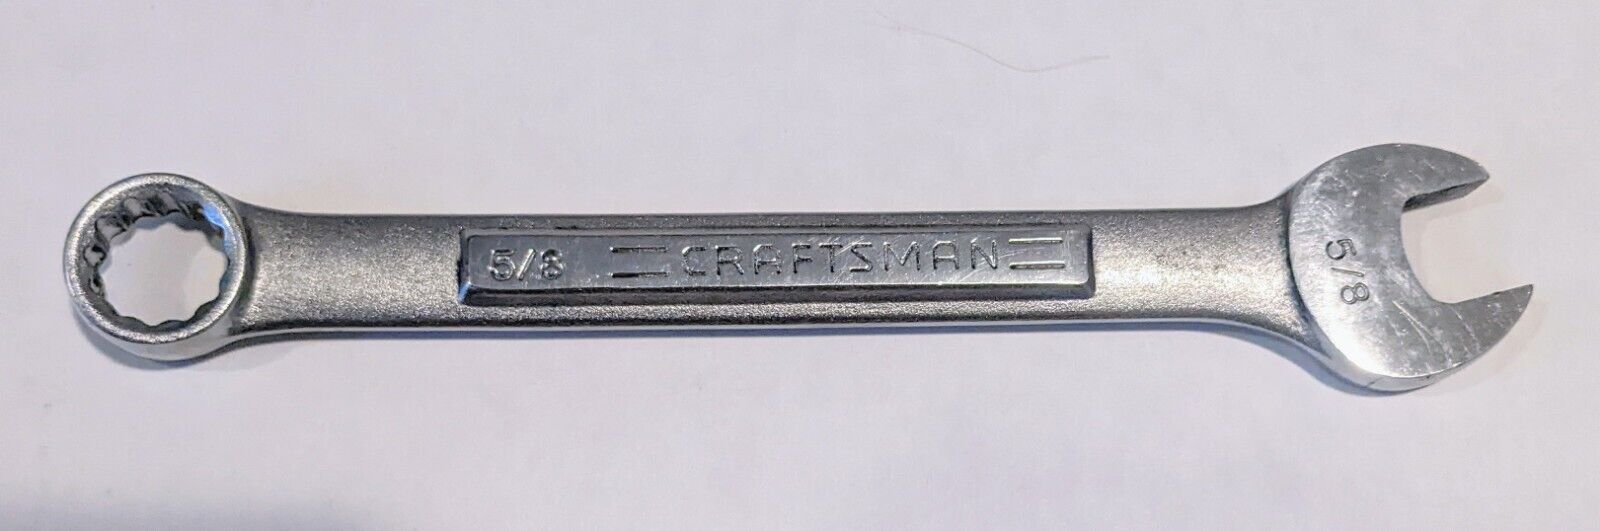 Clean Craftsman 5/8 Inch 44697 Combination Wrench 12 Point SAE